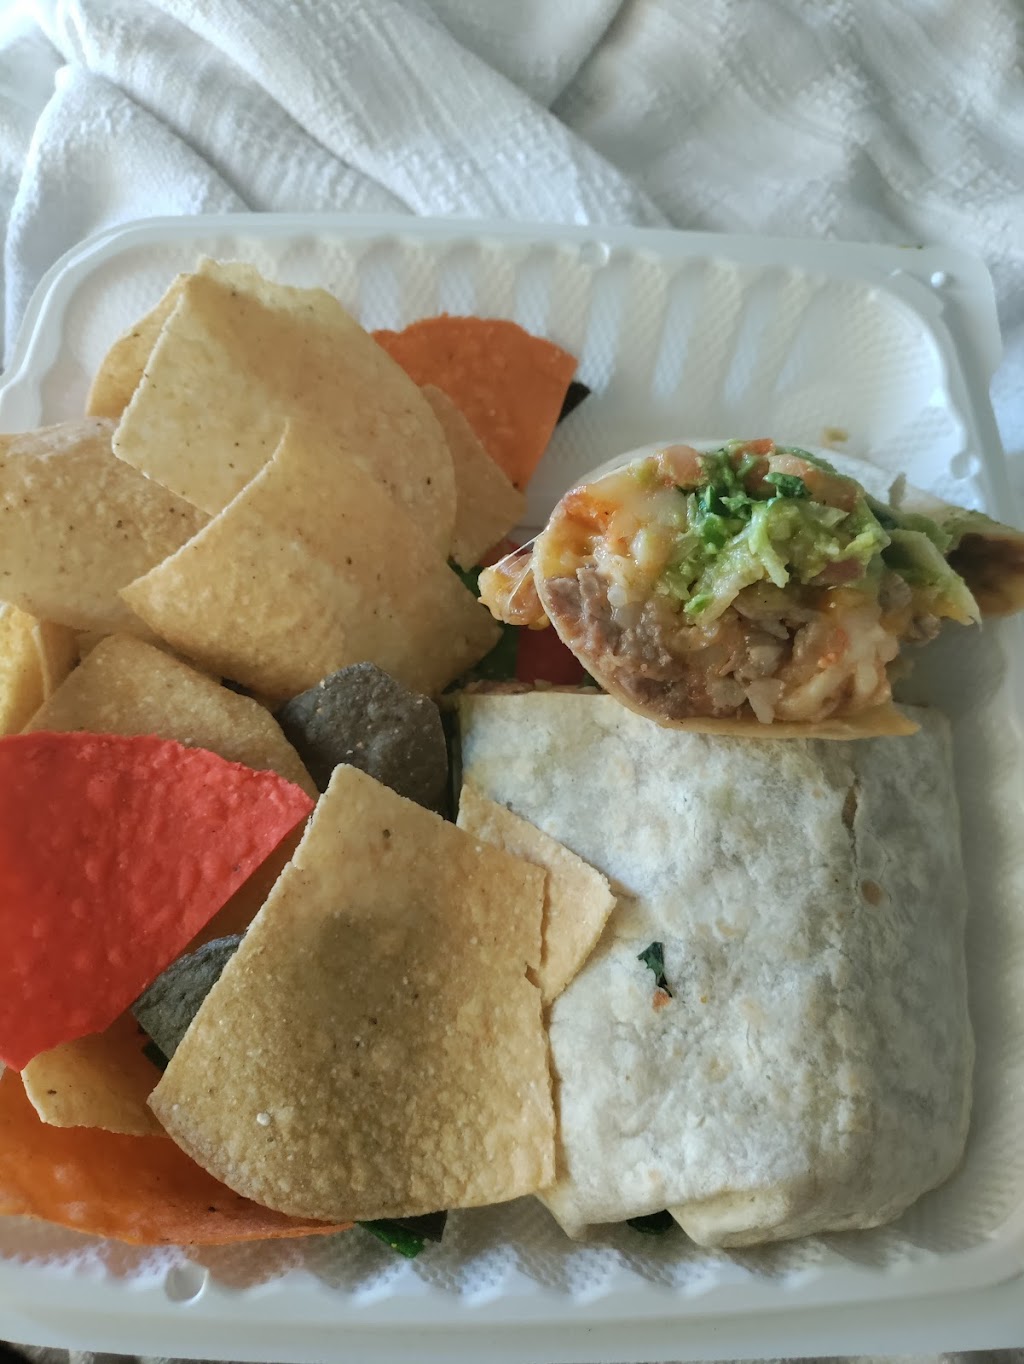 Neri’s Cafe And Mexican Grill | 122 N Delsea Dr, Clayton, NJ 08312 | Phone: (856) 881-7710